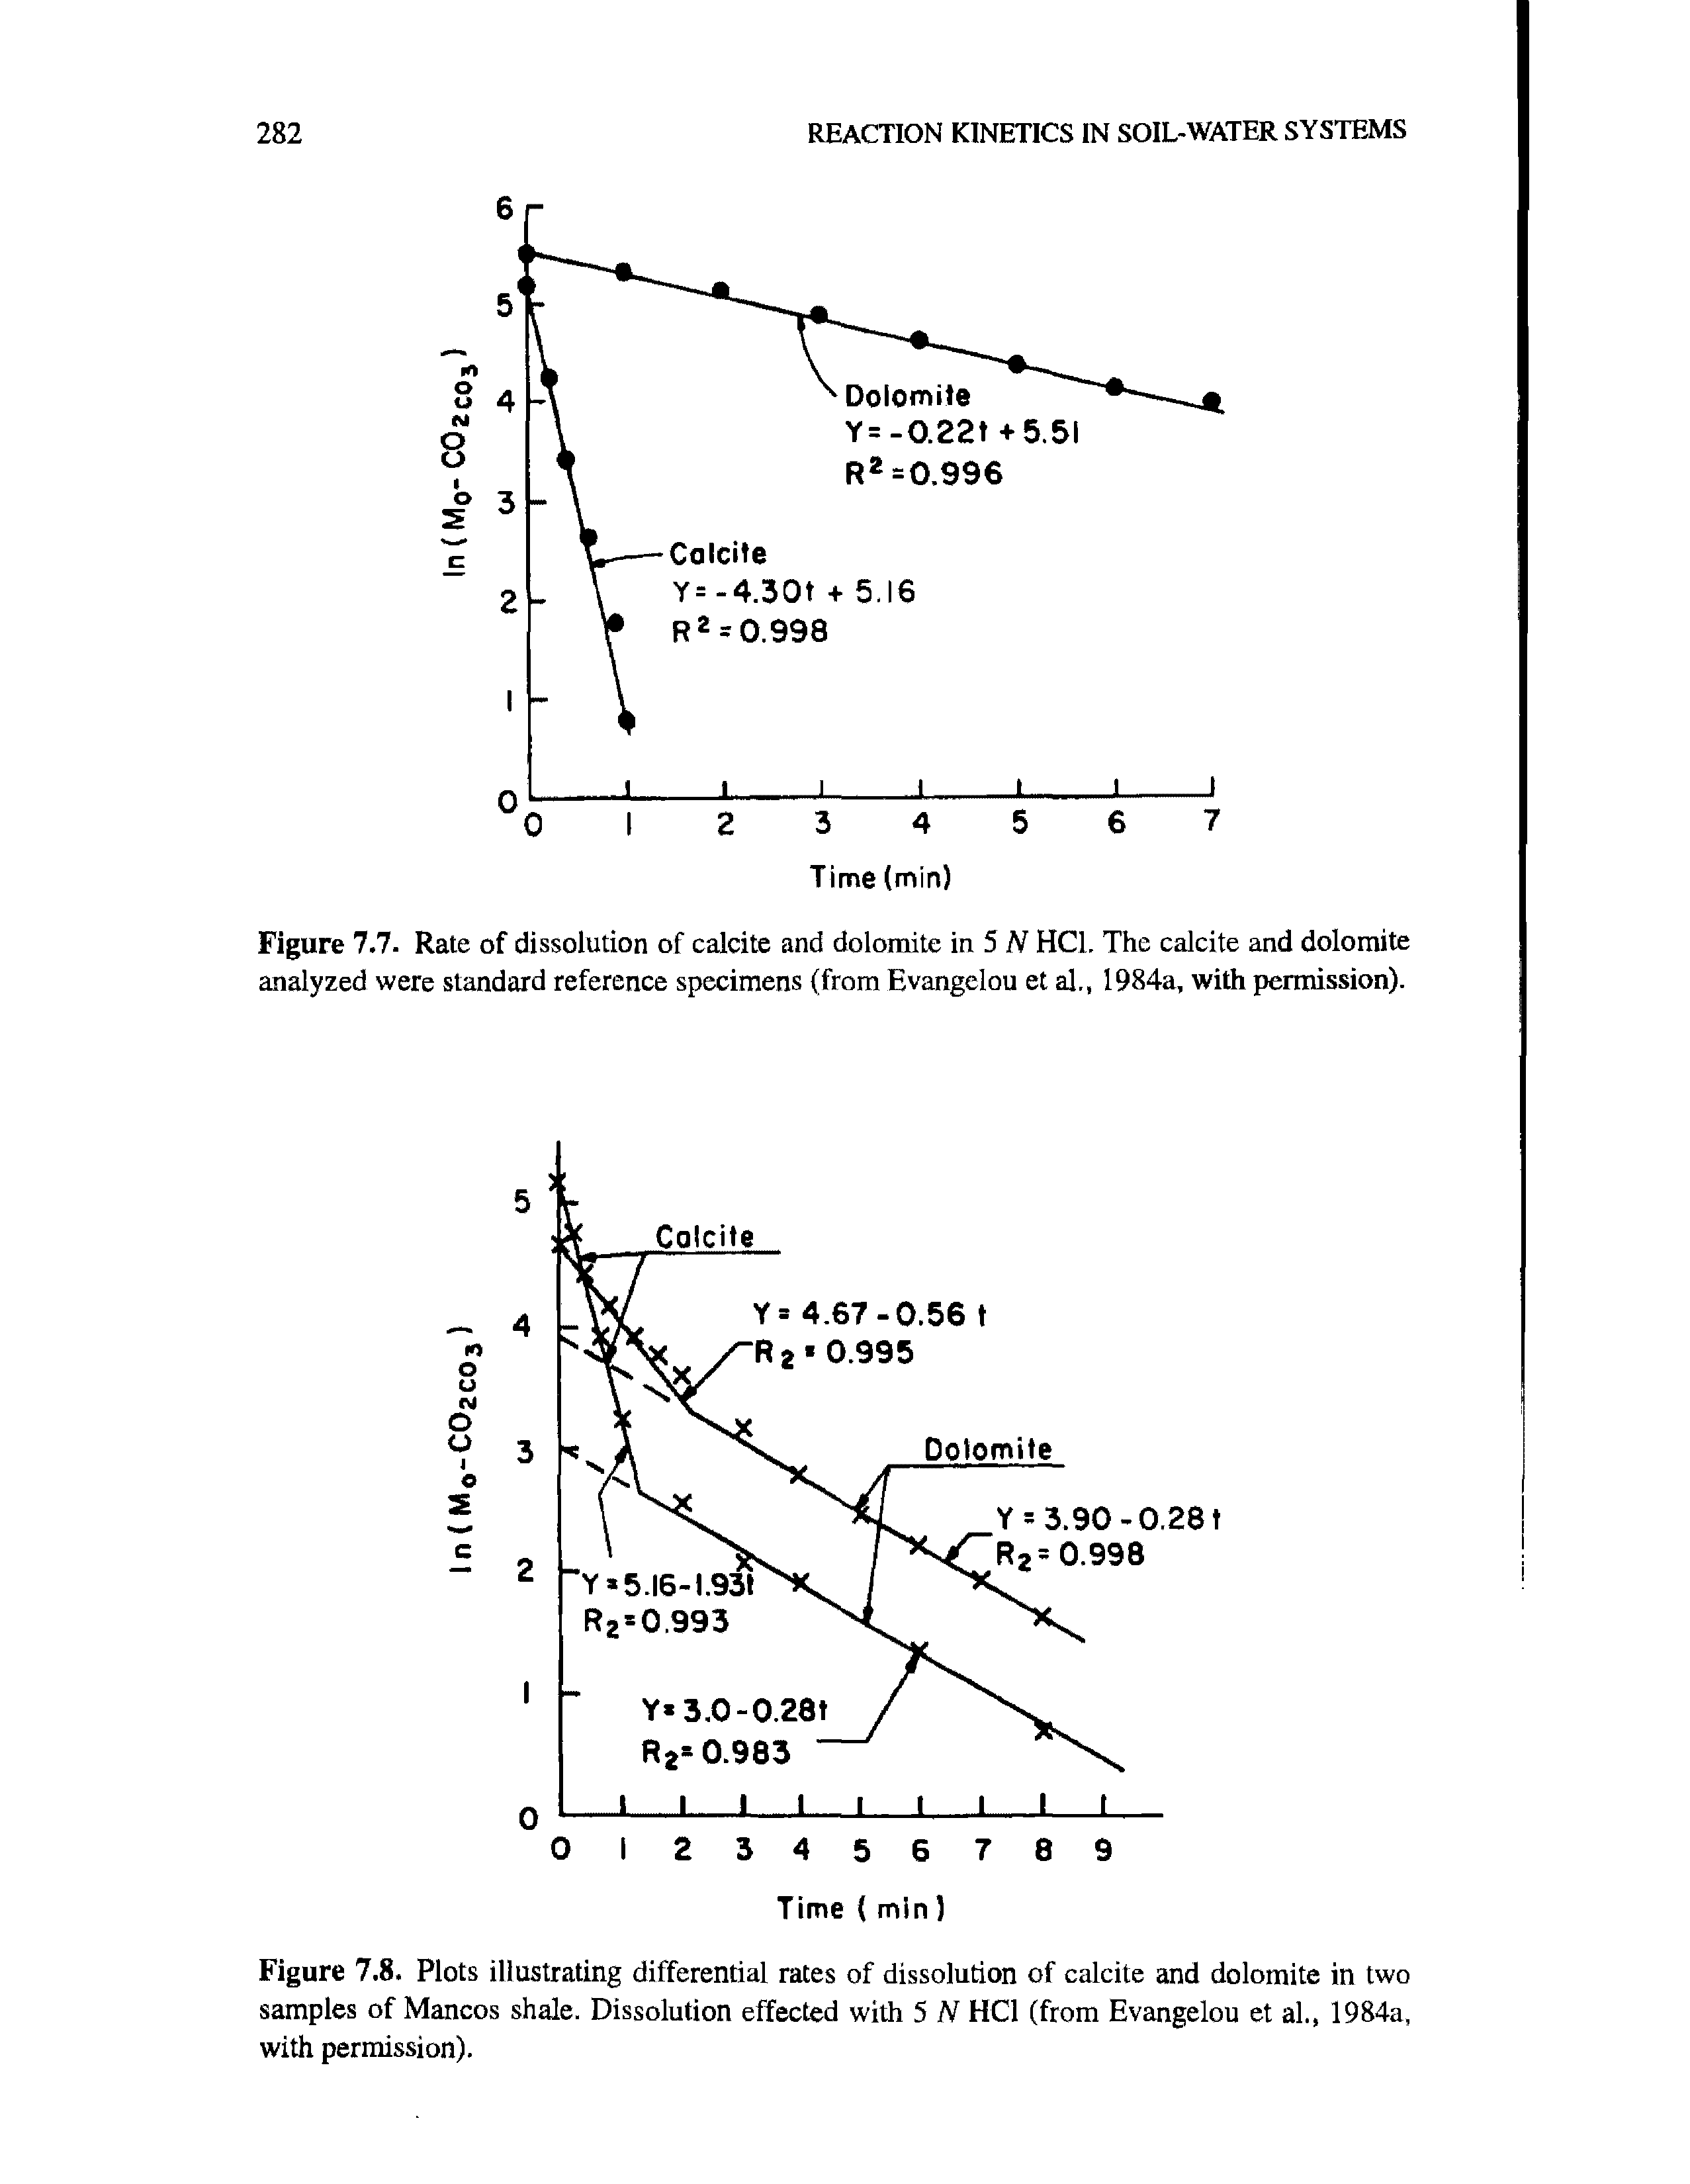 Figure 7.8. Plots illustrating differential rates of dissolution of calcite and dolomite in two samples of Mancos shale. Dissolution effected with 5 N HC1 (from Evangelou et al., 1984a, with permission).